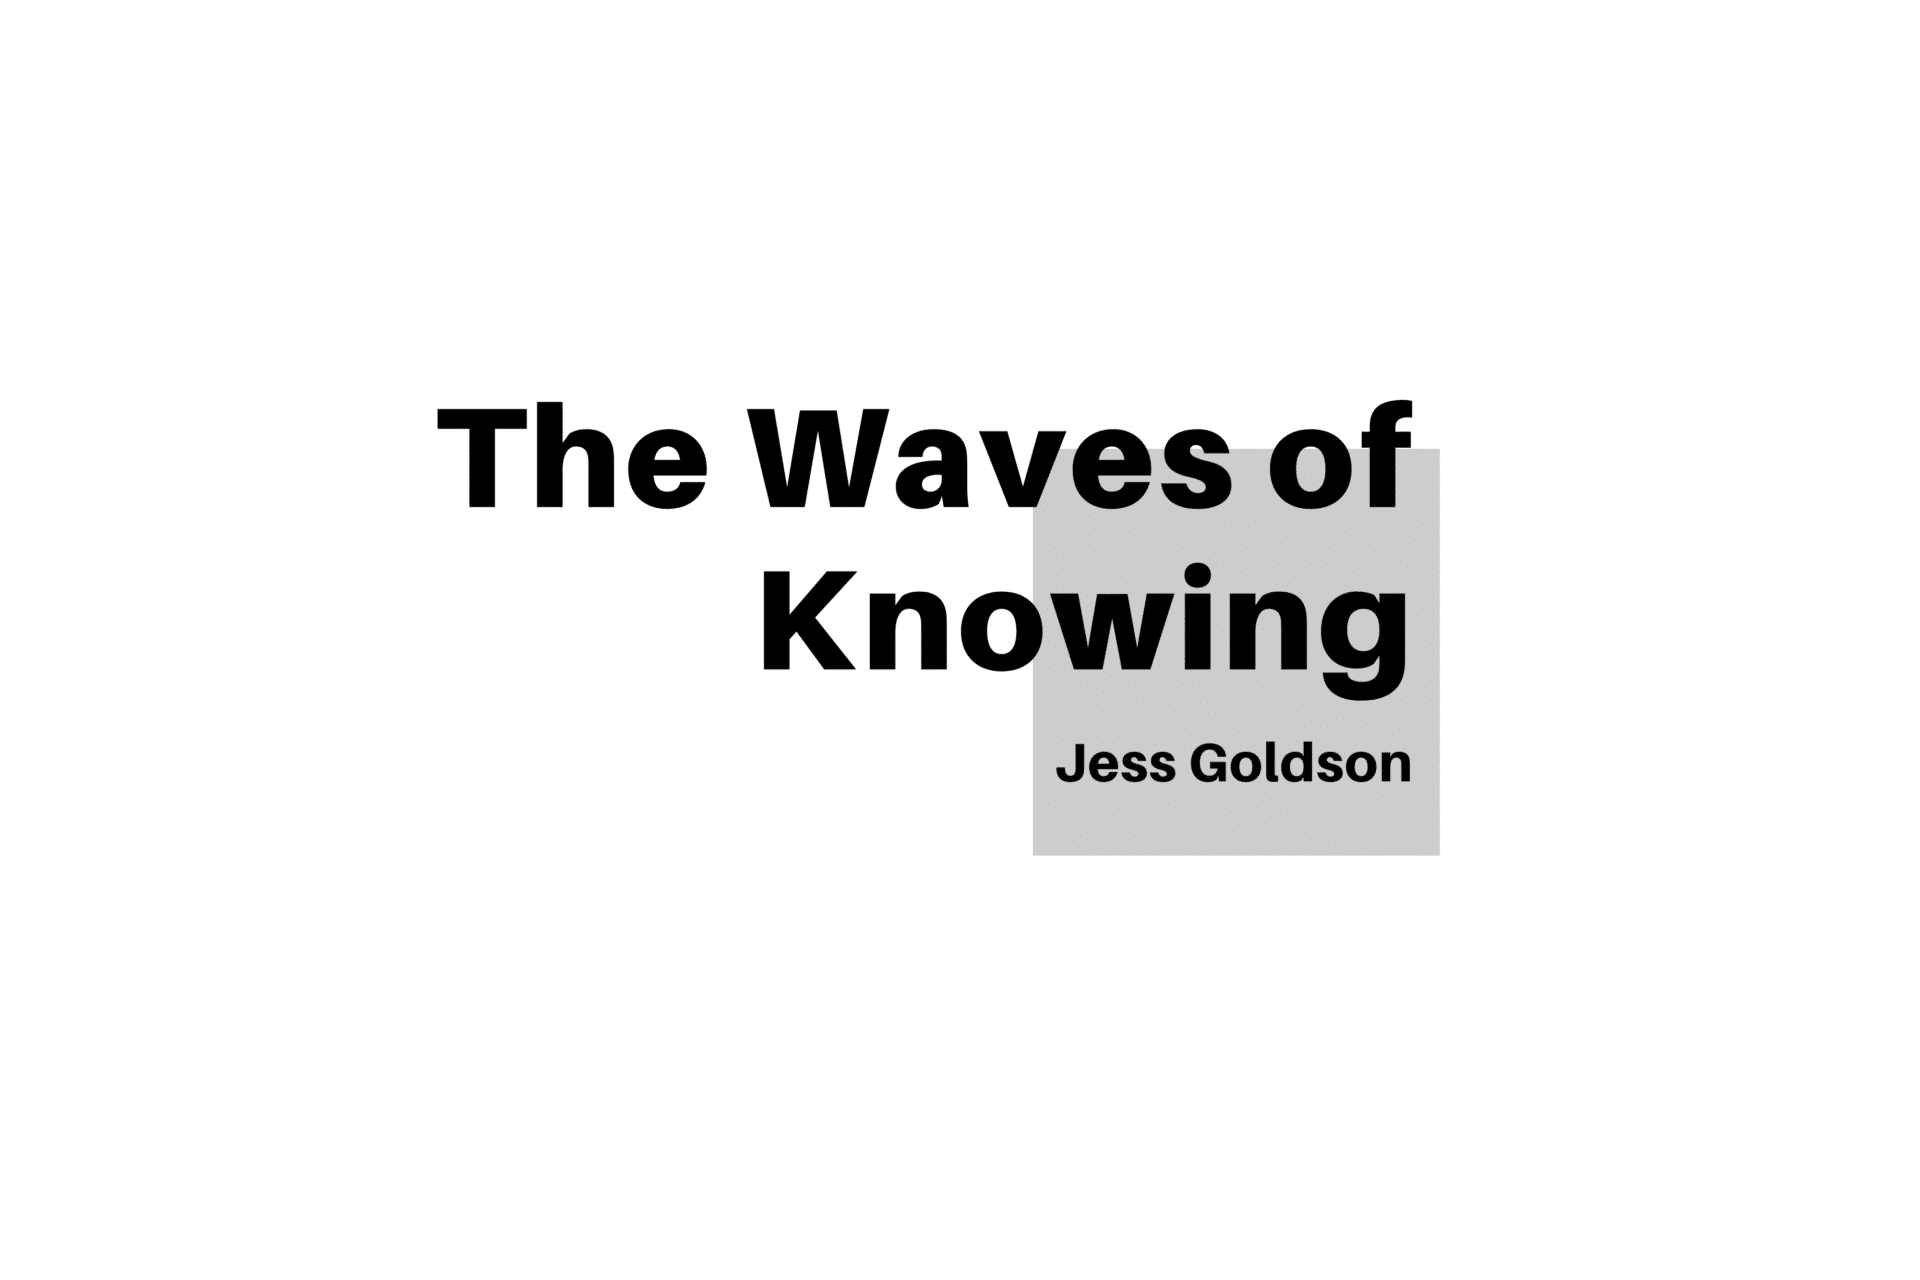 Local Journalism Initiative - The Waves of Knowing title card